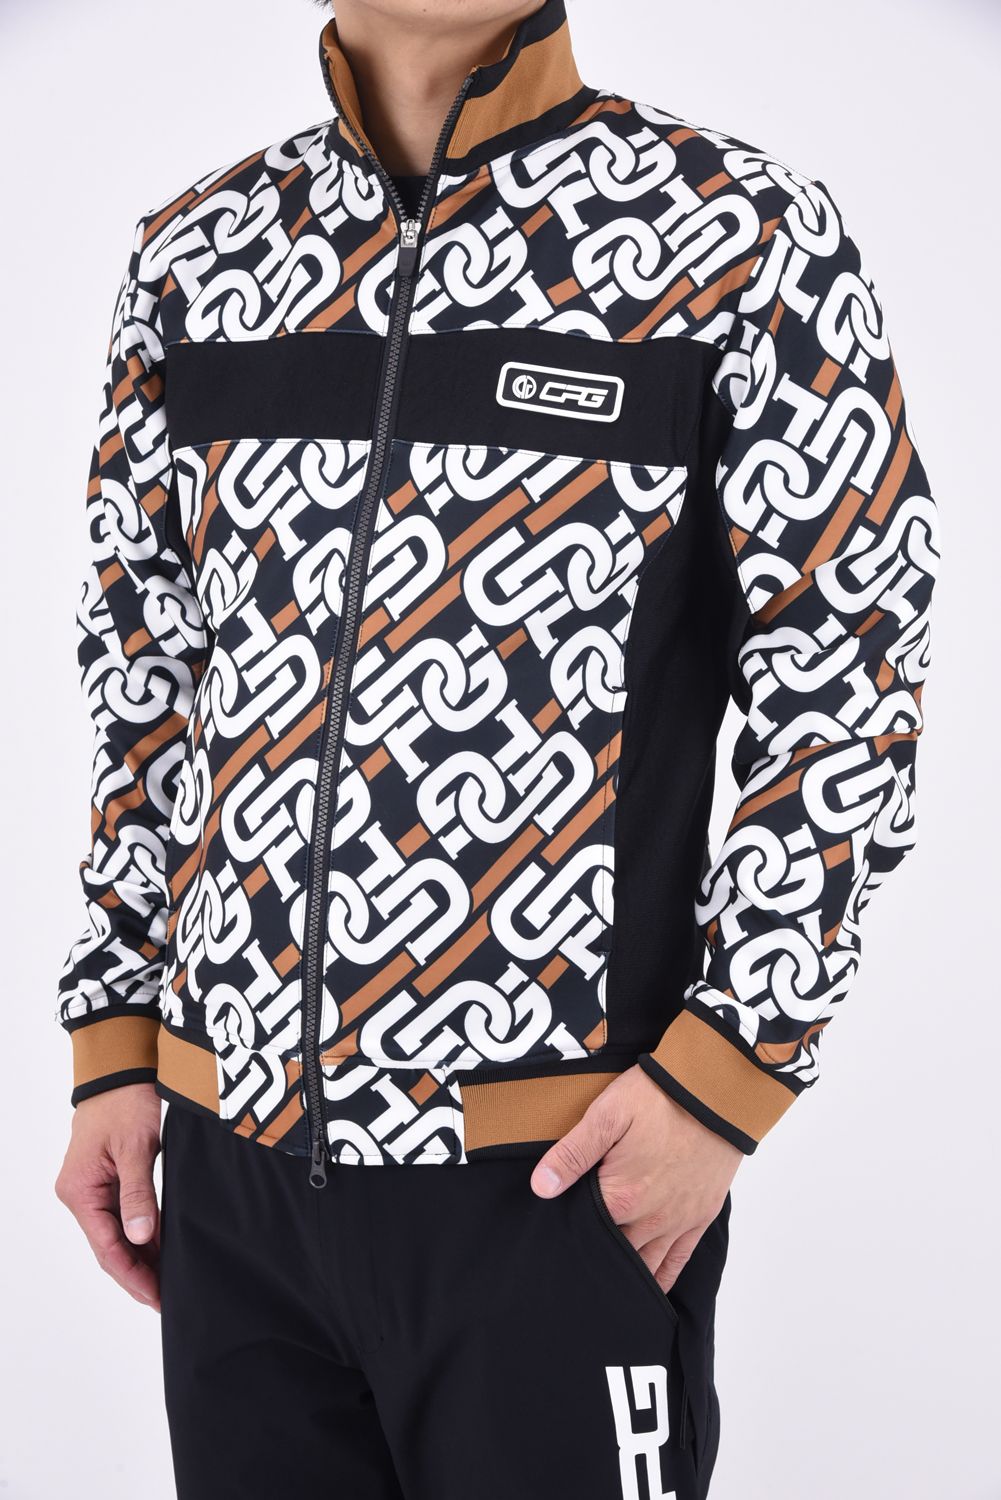 CPG GOLF - CHAIN LOGO ART SNEADED JACKET / チェーンロゴアート